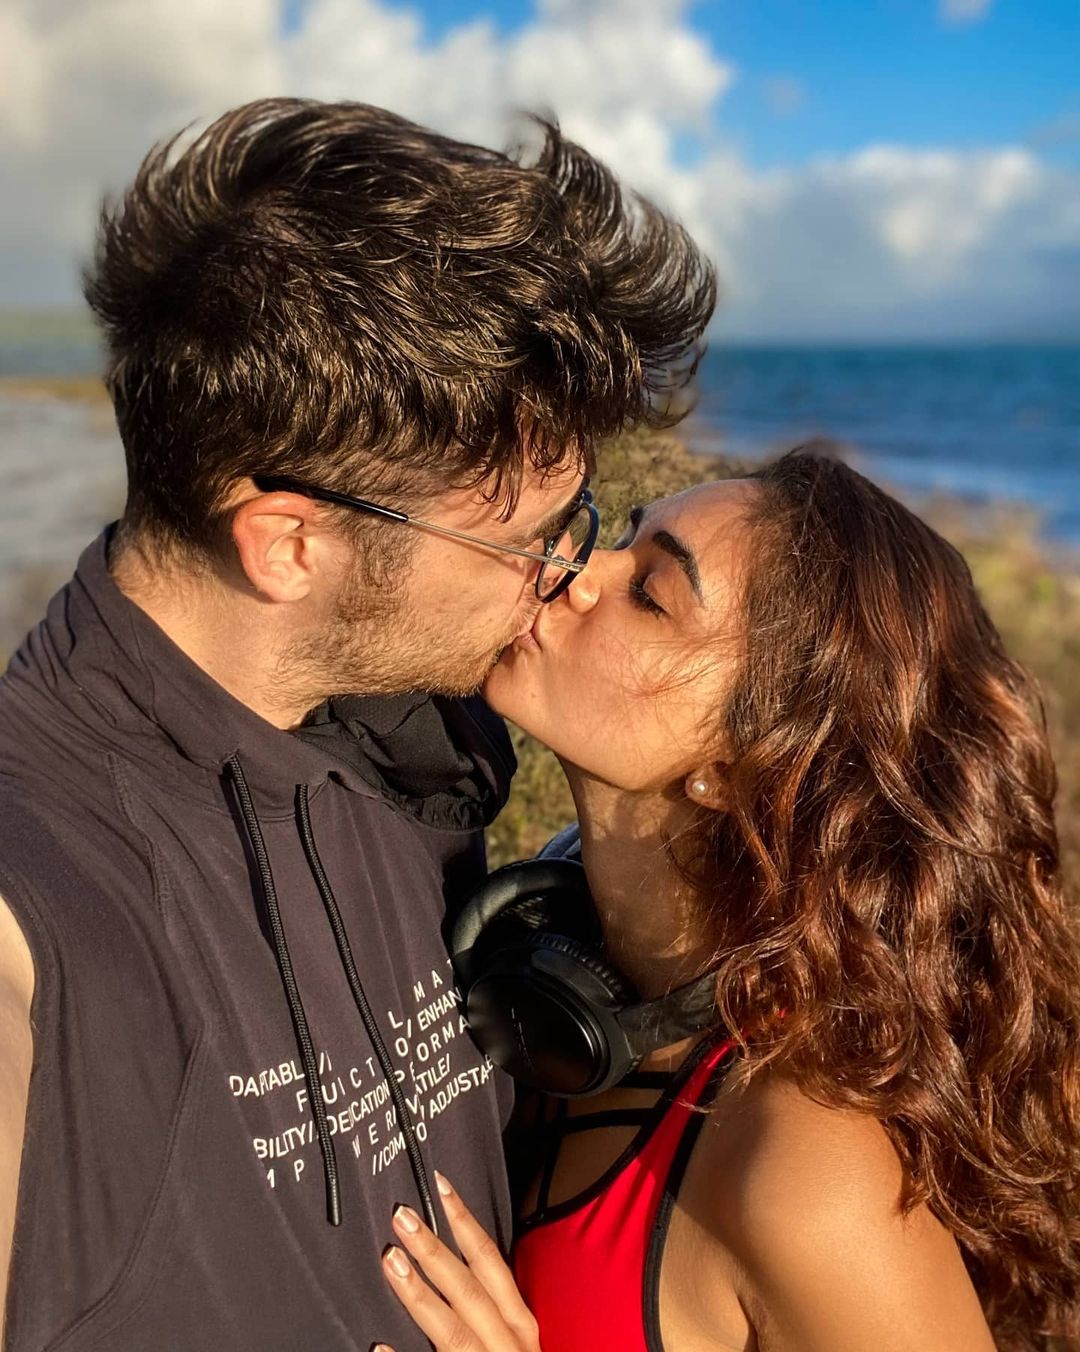 Agon Hare and girlfriend, Sonya Mulkeet is having a romantic moment on Valentine's Day during Costa Rica trip in 2021. How is Agon and Sonya's dating life going?